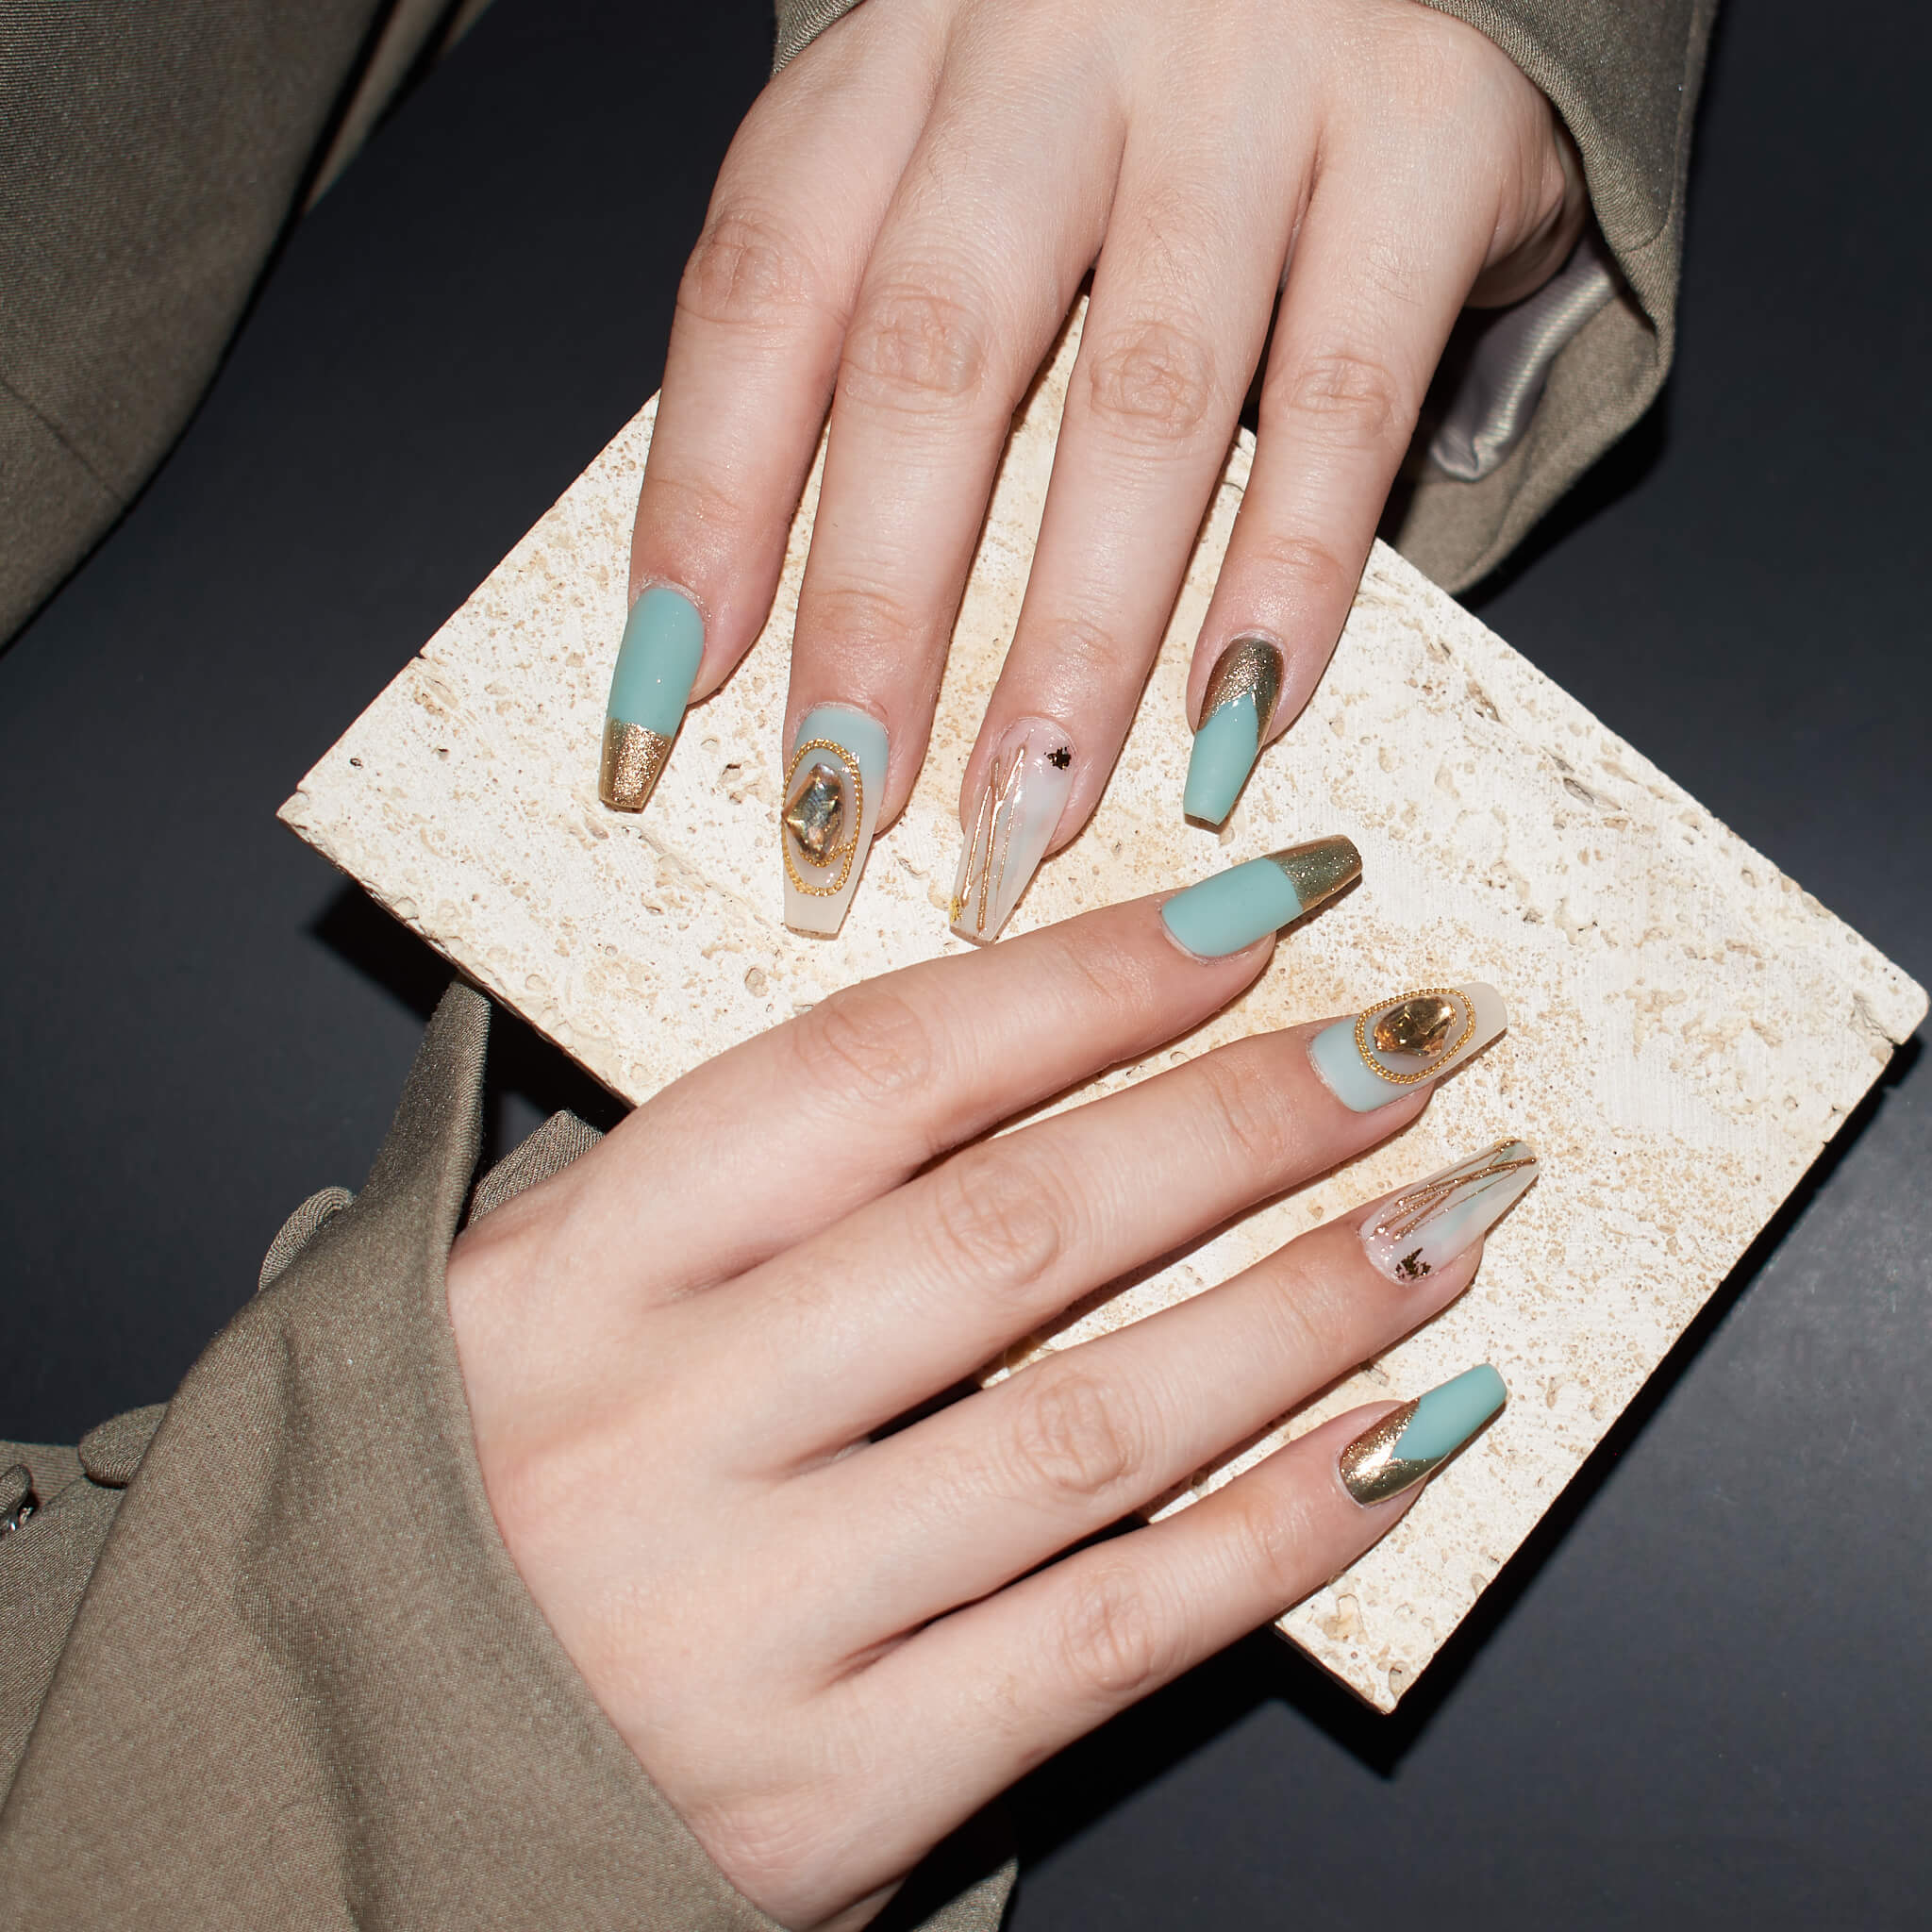 Hands with long, coffin-shaped press-on nails in matte aqua blue and glossy beige with gold accents, holding a textured beige object.